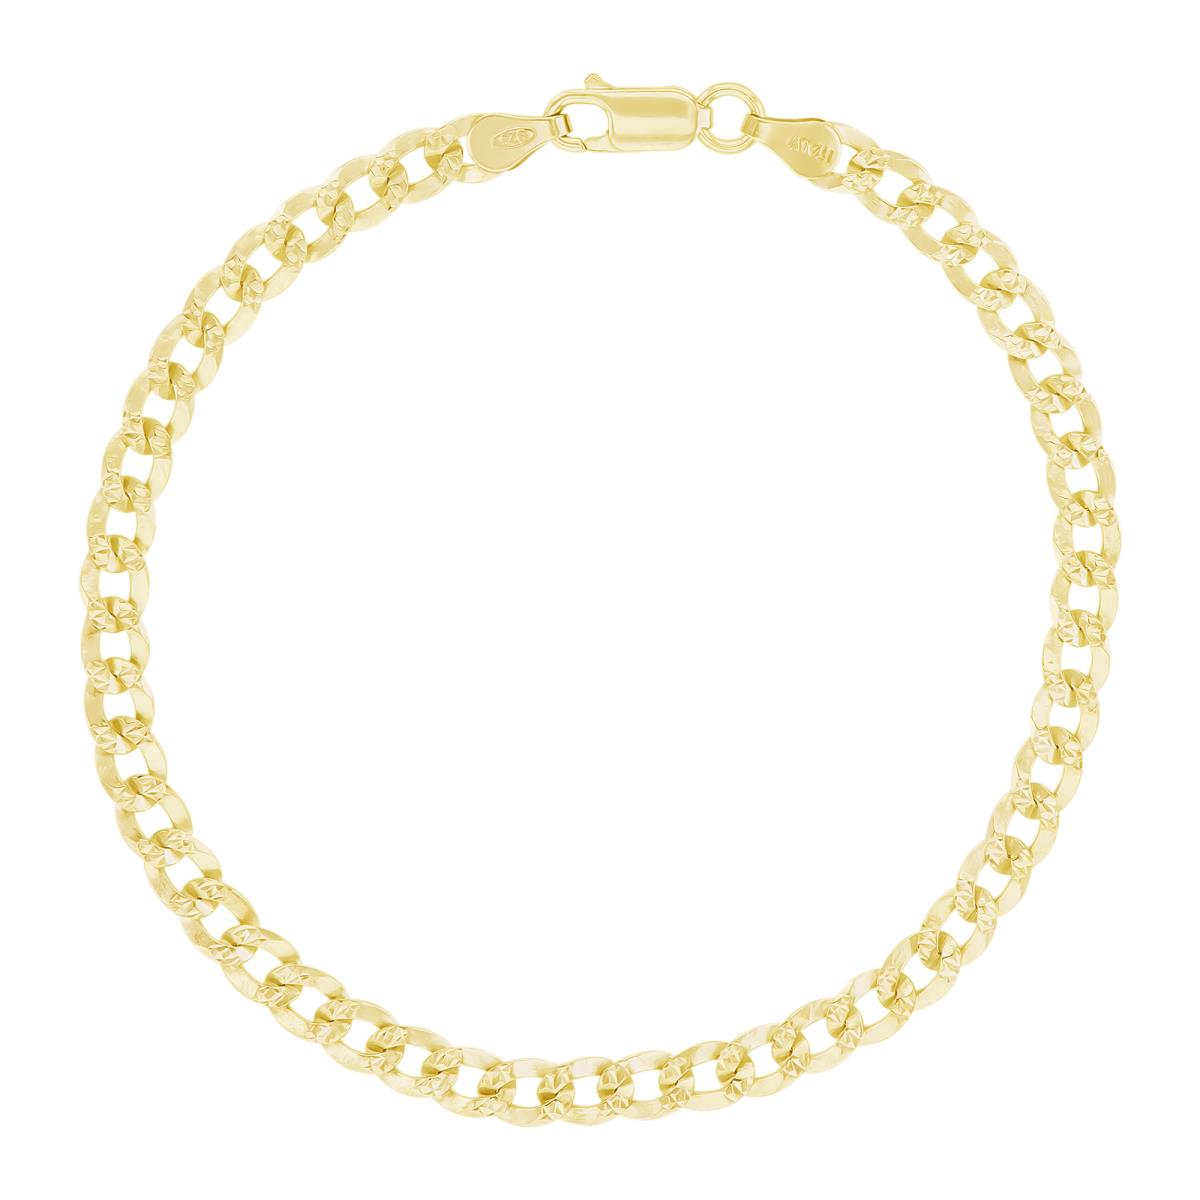 Sterling Silver Yellow DC 4.6mm 120 Curb Pave 8.25"Chain Bracelet